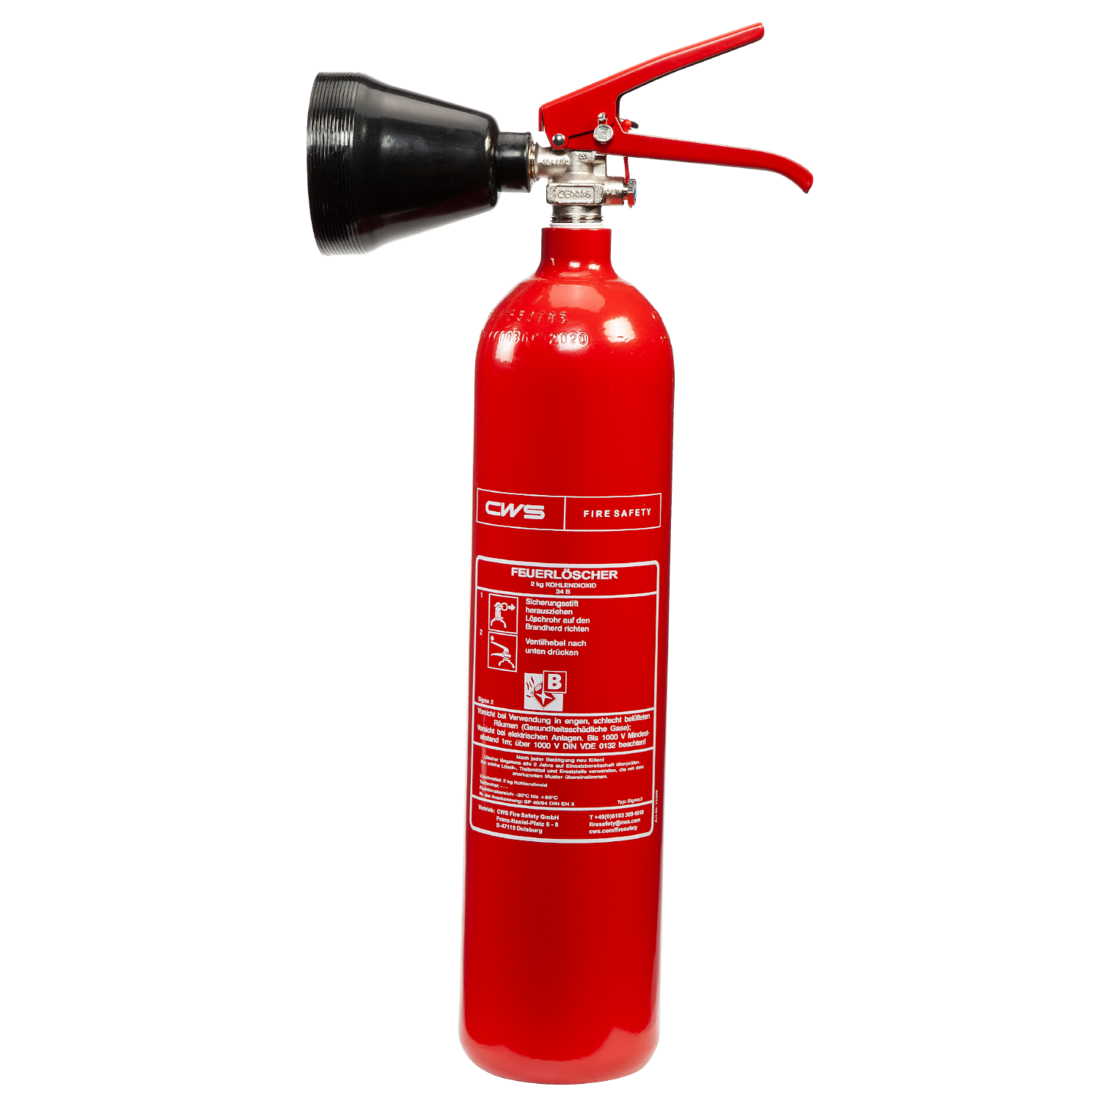 CO2 fire extinguishers